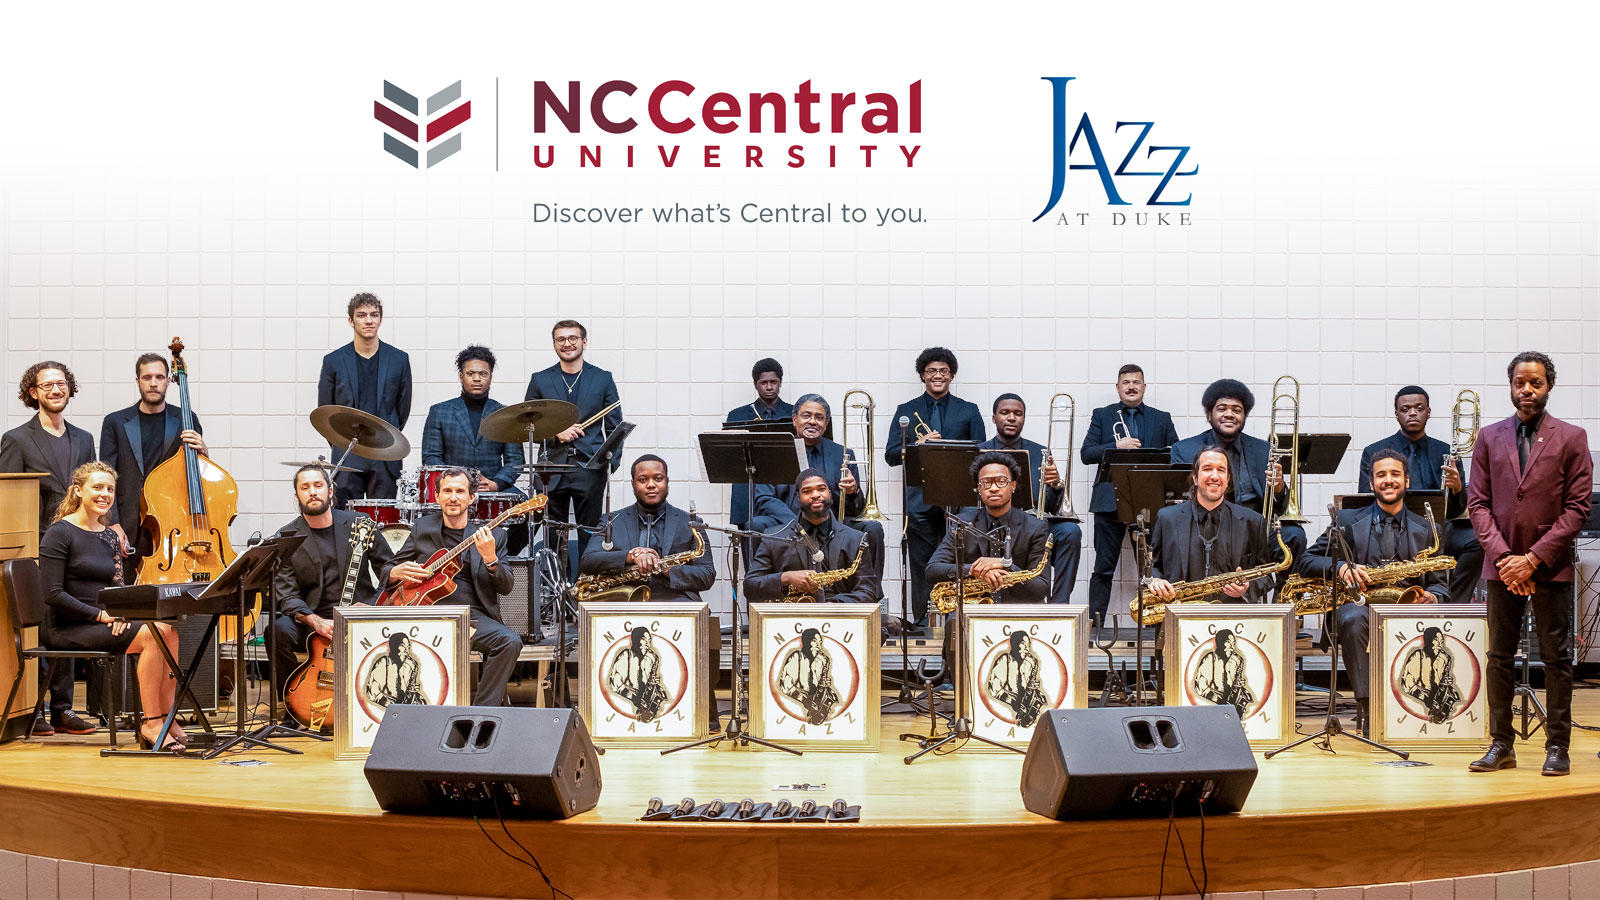 NCCU Jazz Ensemble, North Carolina Central University - Discover what's central to you | Jazz at Duke